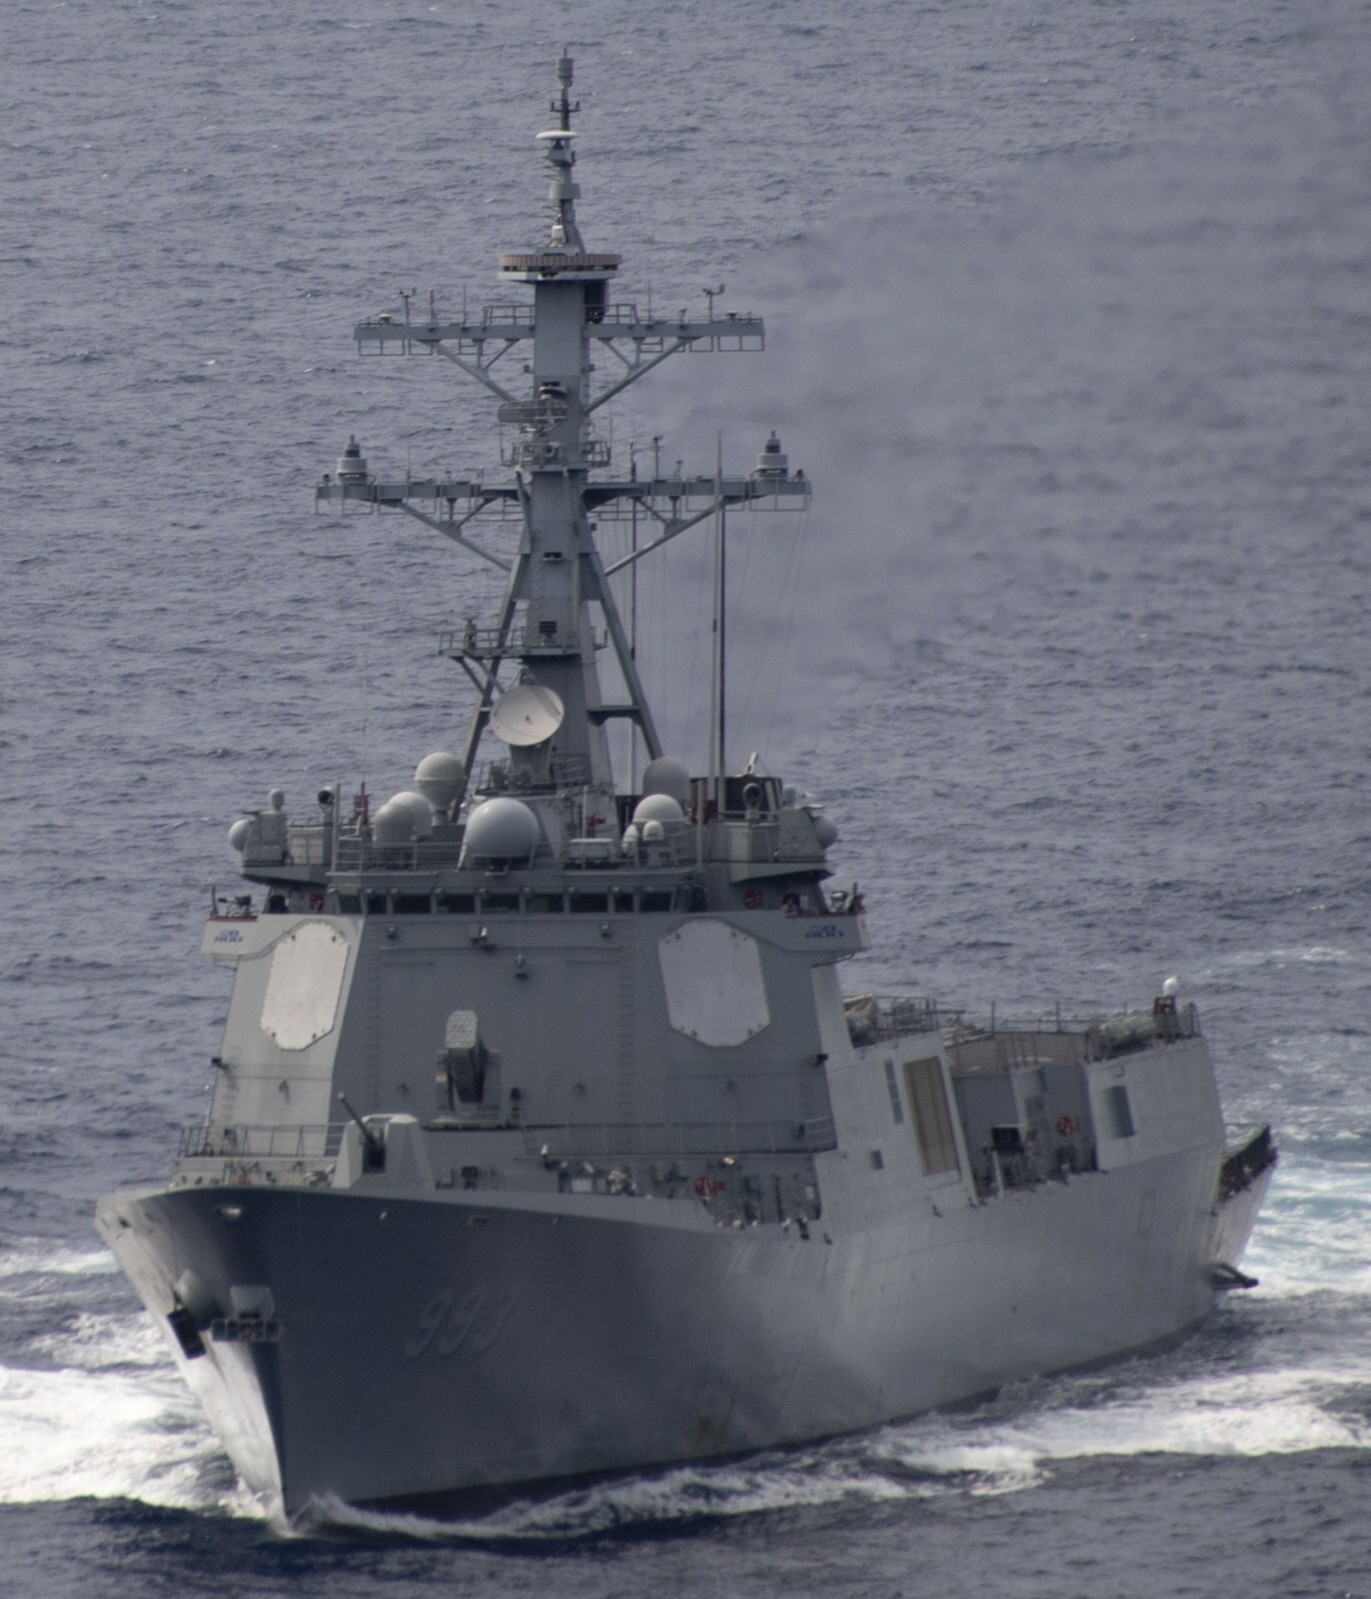 ddg-993 roks seoae ryu seong-ryong sejong the great class guided missile destroyer aegis republic of korea navy rokn 04